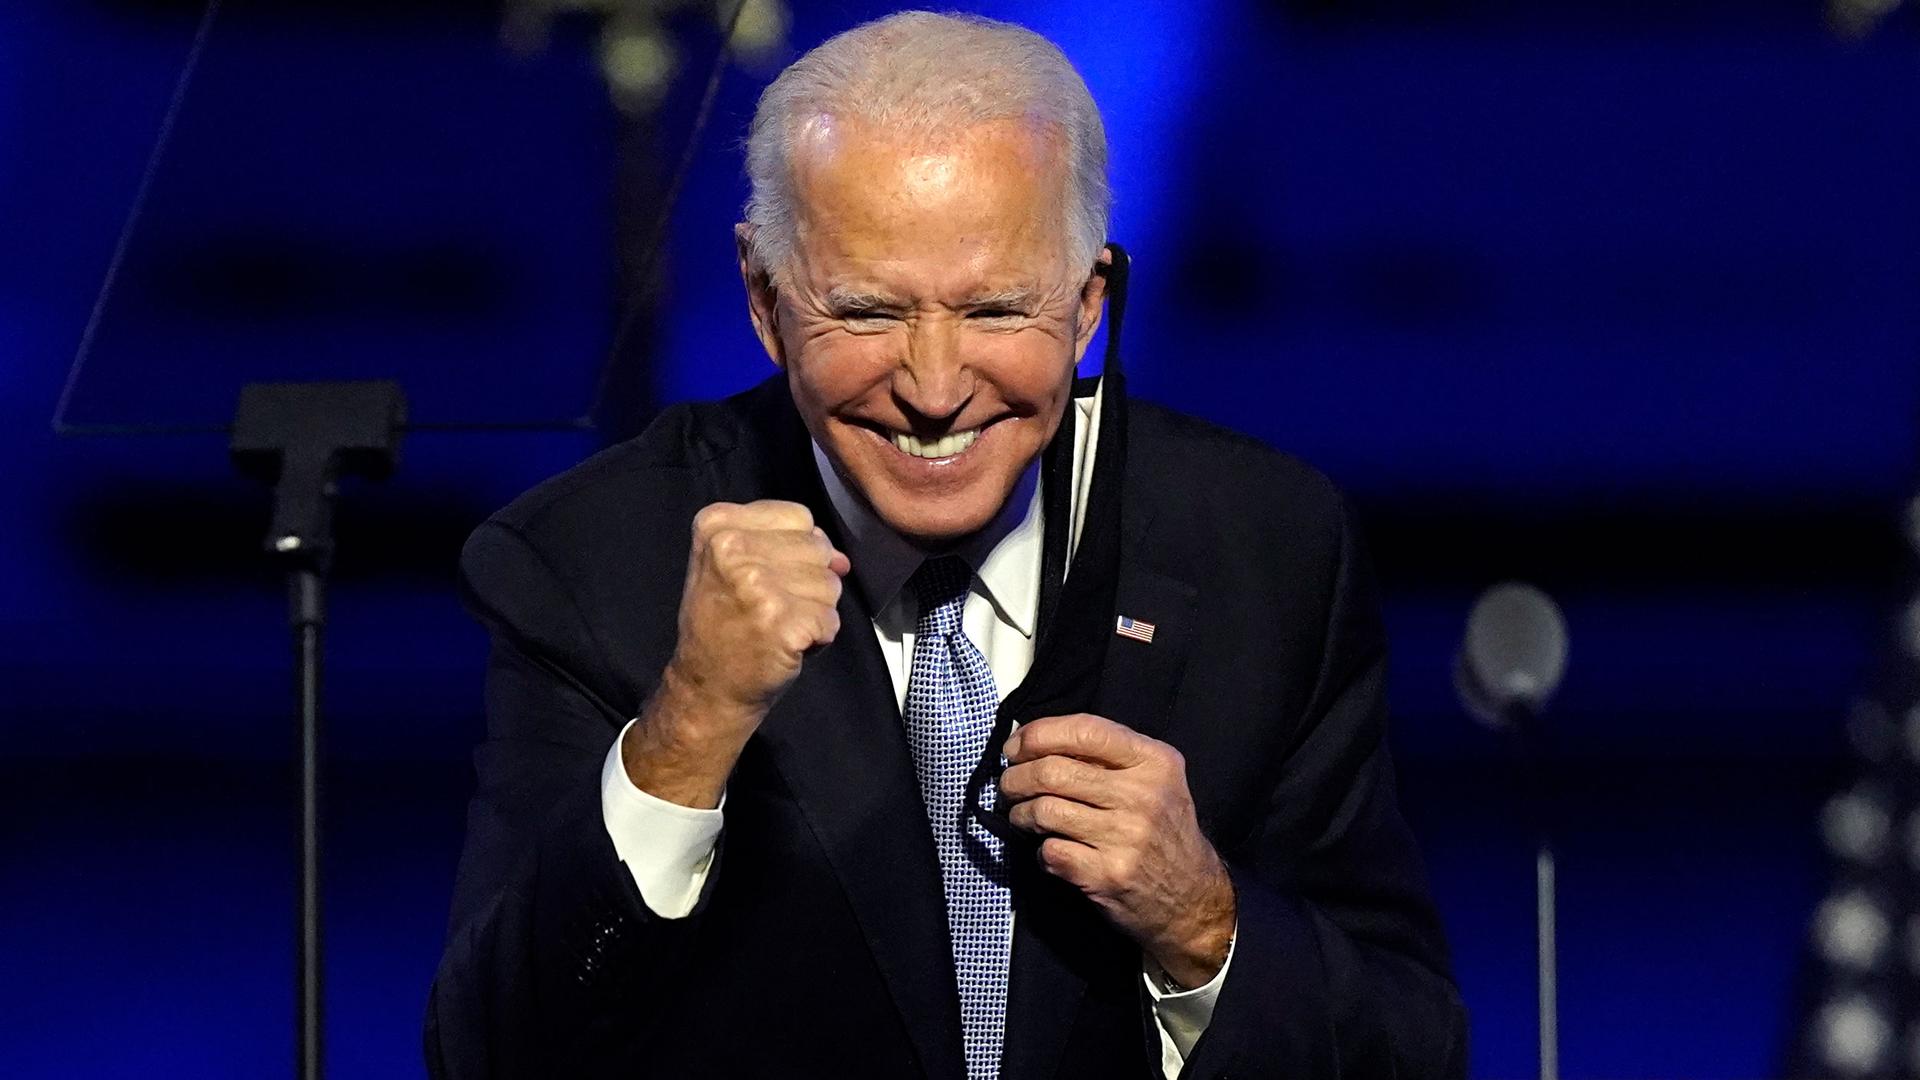 President-elect Joe Biden is shown wearing a dark suit and smiling while holding his fists up like a boxer.